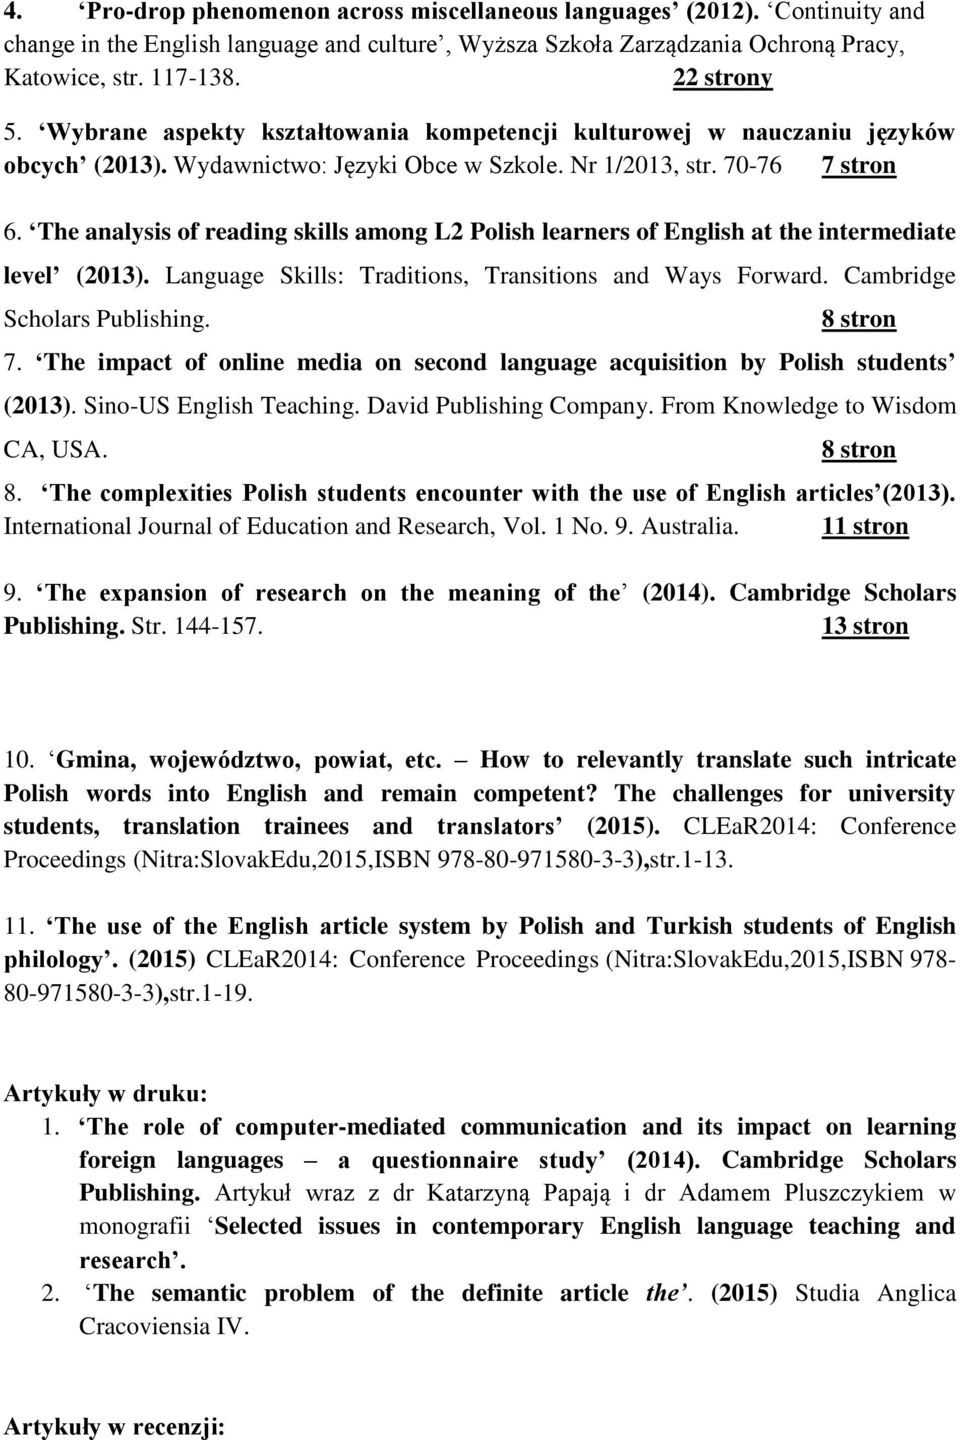 The analysis of reading skills among L2 Polish learners of English at the intermediate level (2013). Language Skills: Traditions, Transitions and Ways Forward. Cambridge Scholars Publishing.